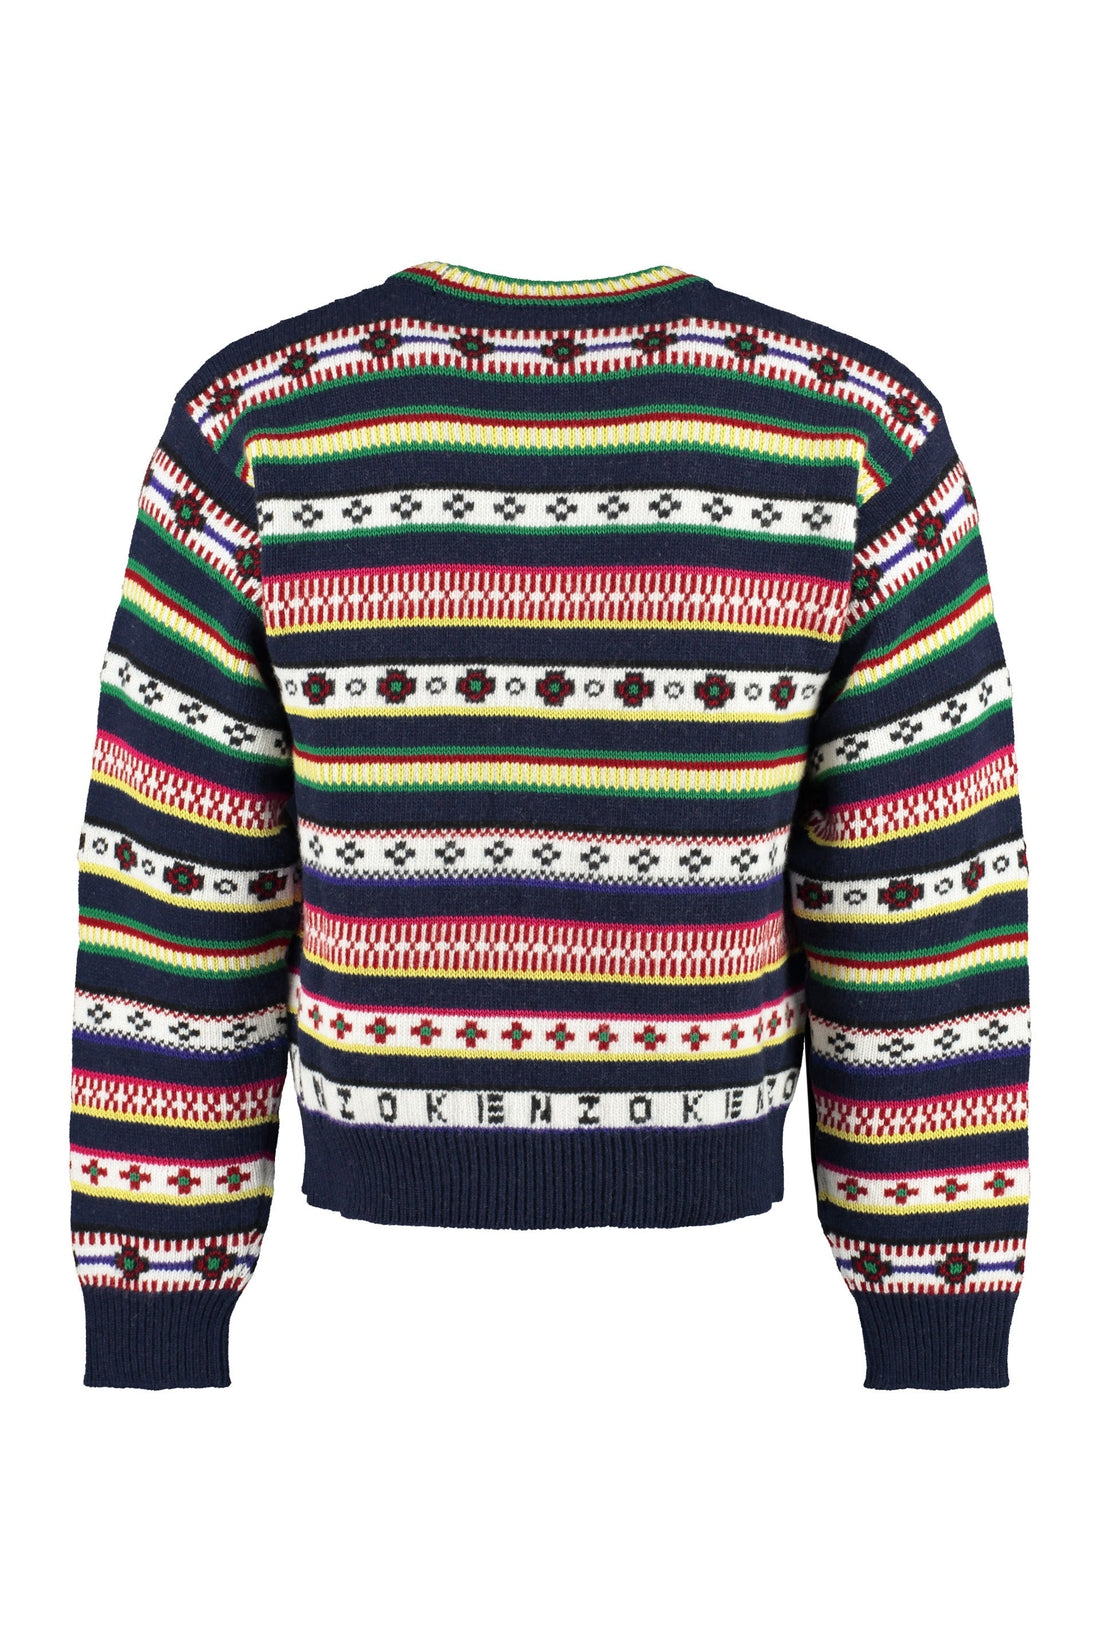 Kenzo-OUTLET-SALE-Jacquard wool sweater-ARCHIVIST